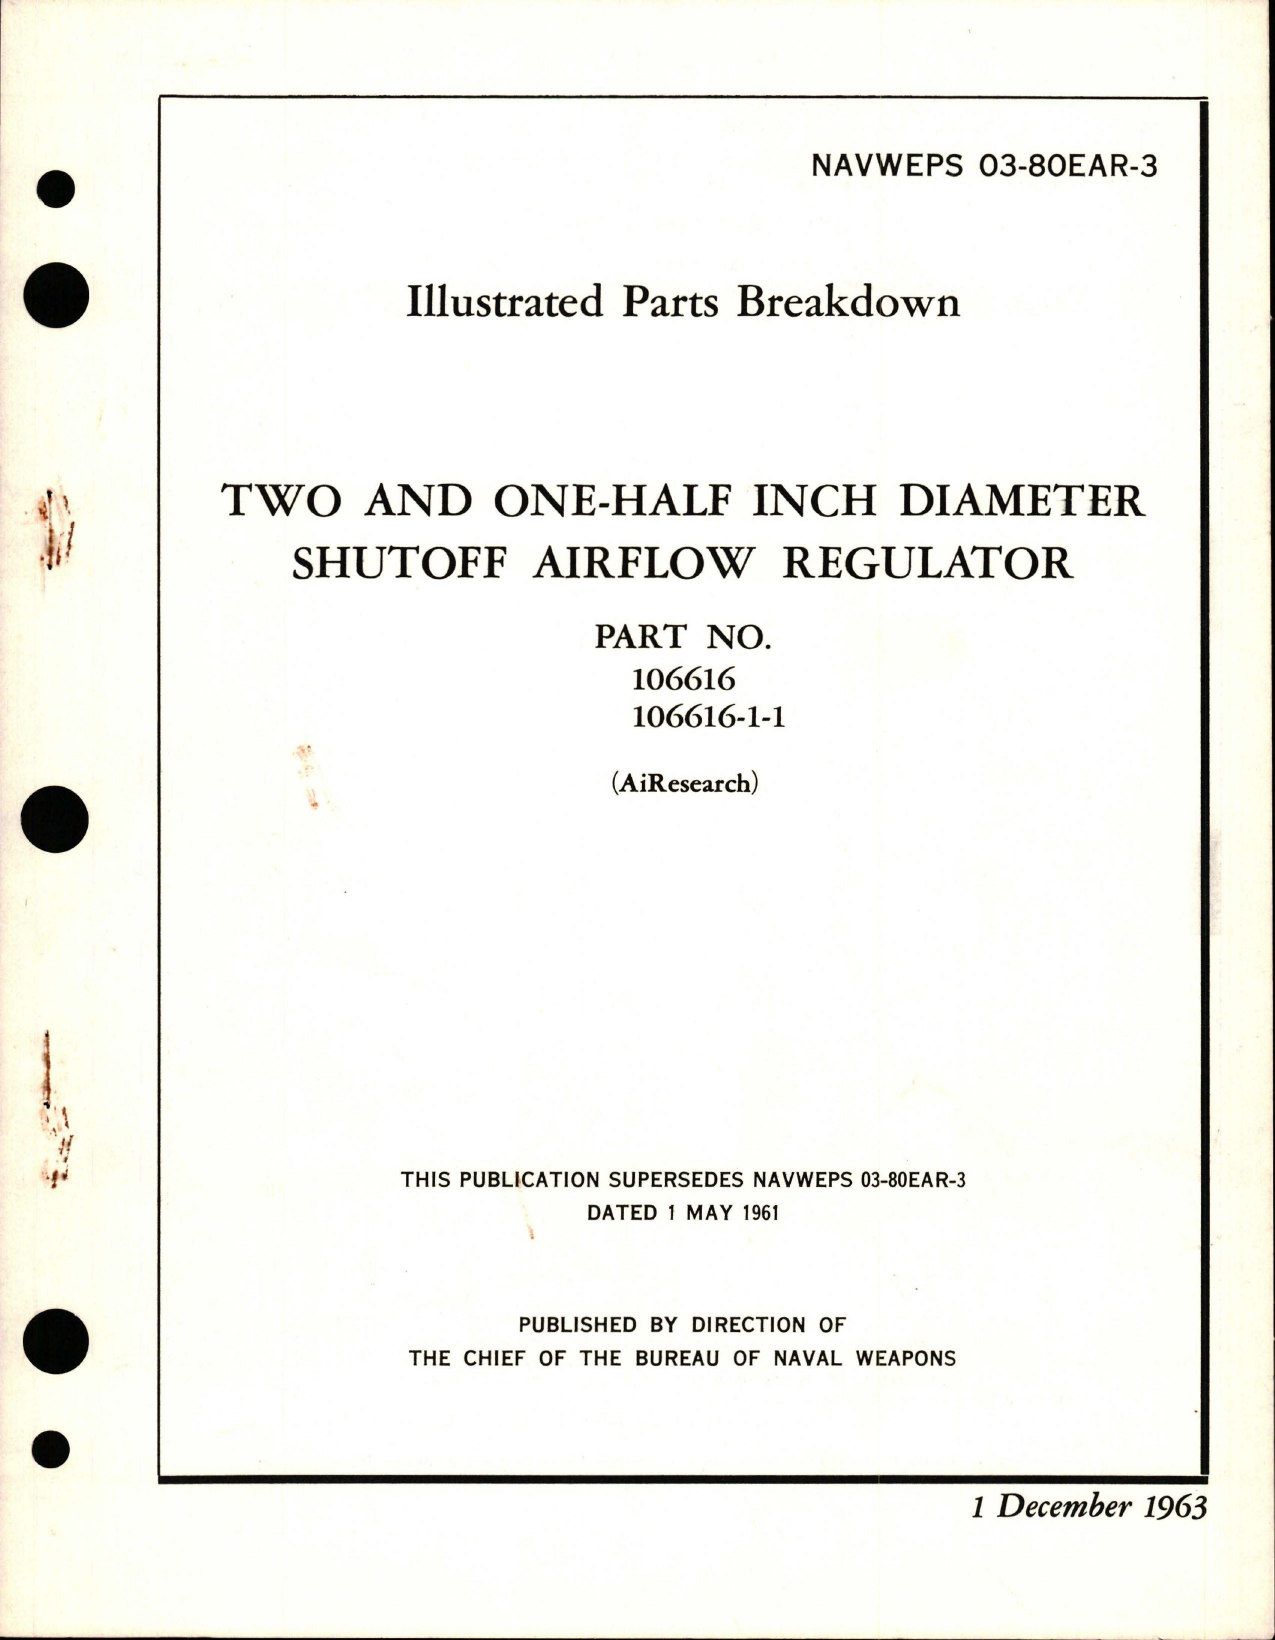 Sample page 1 from AirCorps Library document: Illustrated Parts for Two and One-Half Inch Diameter Shutoff Airflow Regulator - Part 106616 and 106616-1-1